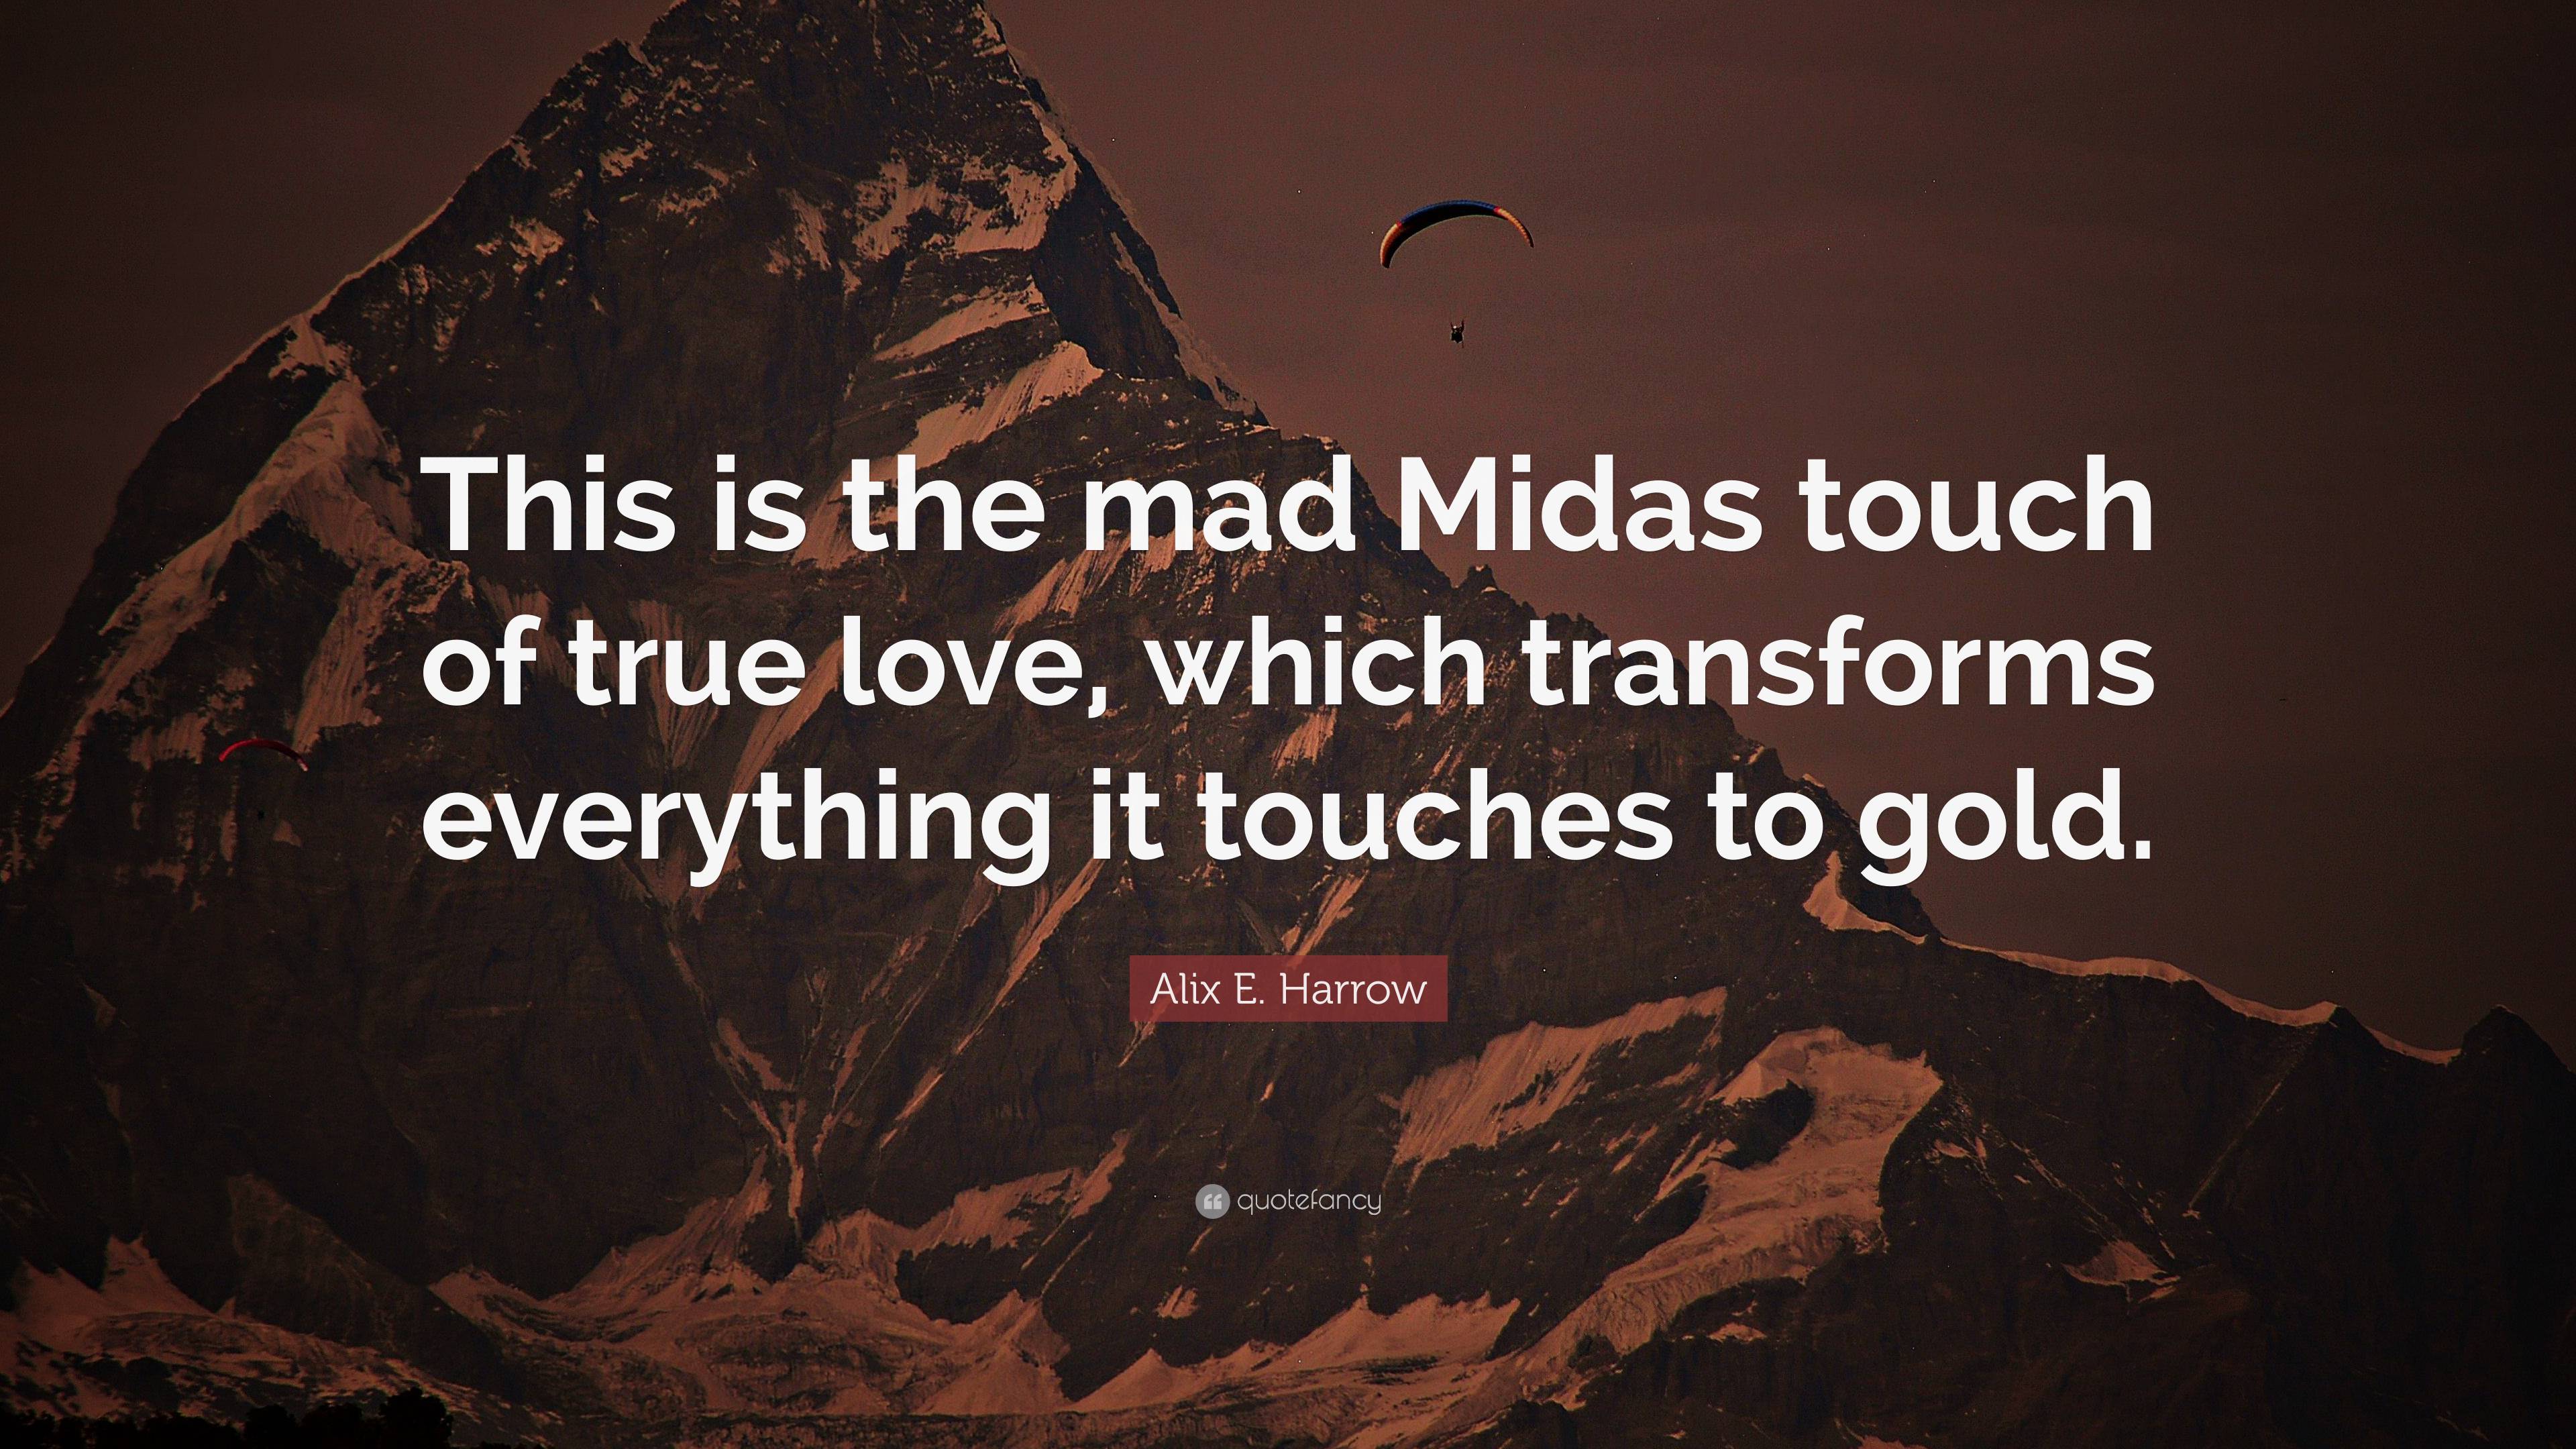 New midas touch Quotes, Status, Photo, Video